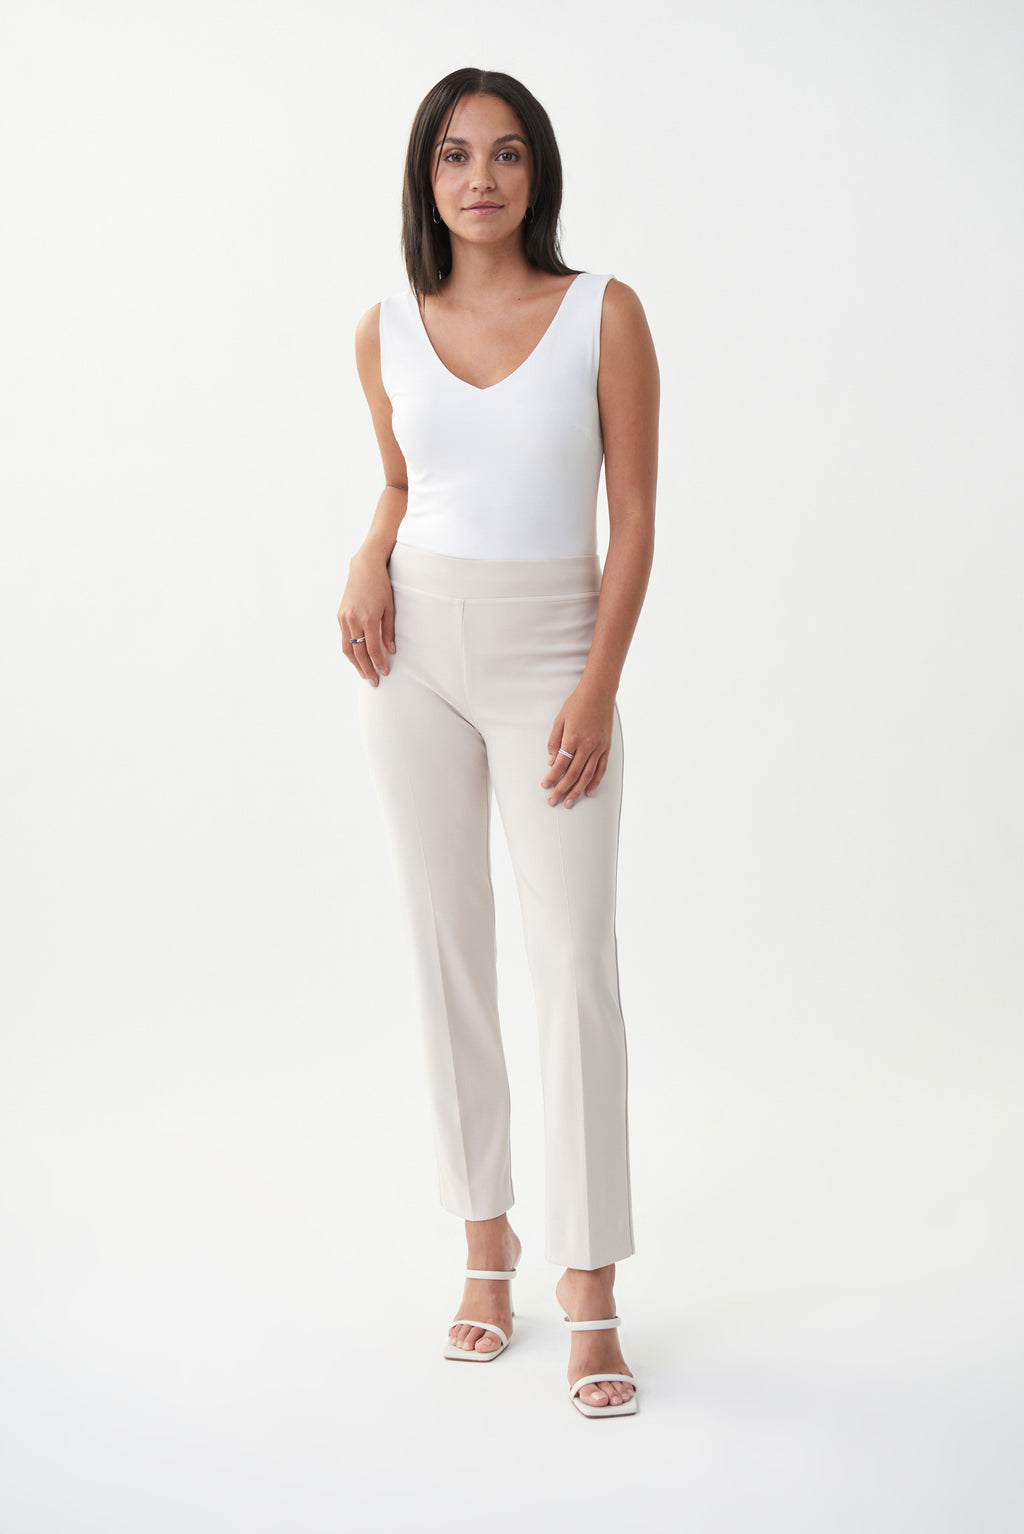 If you're a woman-on-the-go searching for the perfect everyday pants, then look no further. This sand coloured straight-fit pull-on pant is ideal for the woman who prioritizes comfort and versatility. The flattering silky knit material paired with a covered elastic waistband creates an effortless style, while the slits on the back bottom legs give a classy detail.